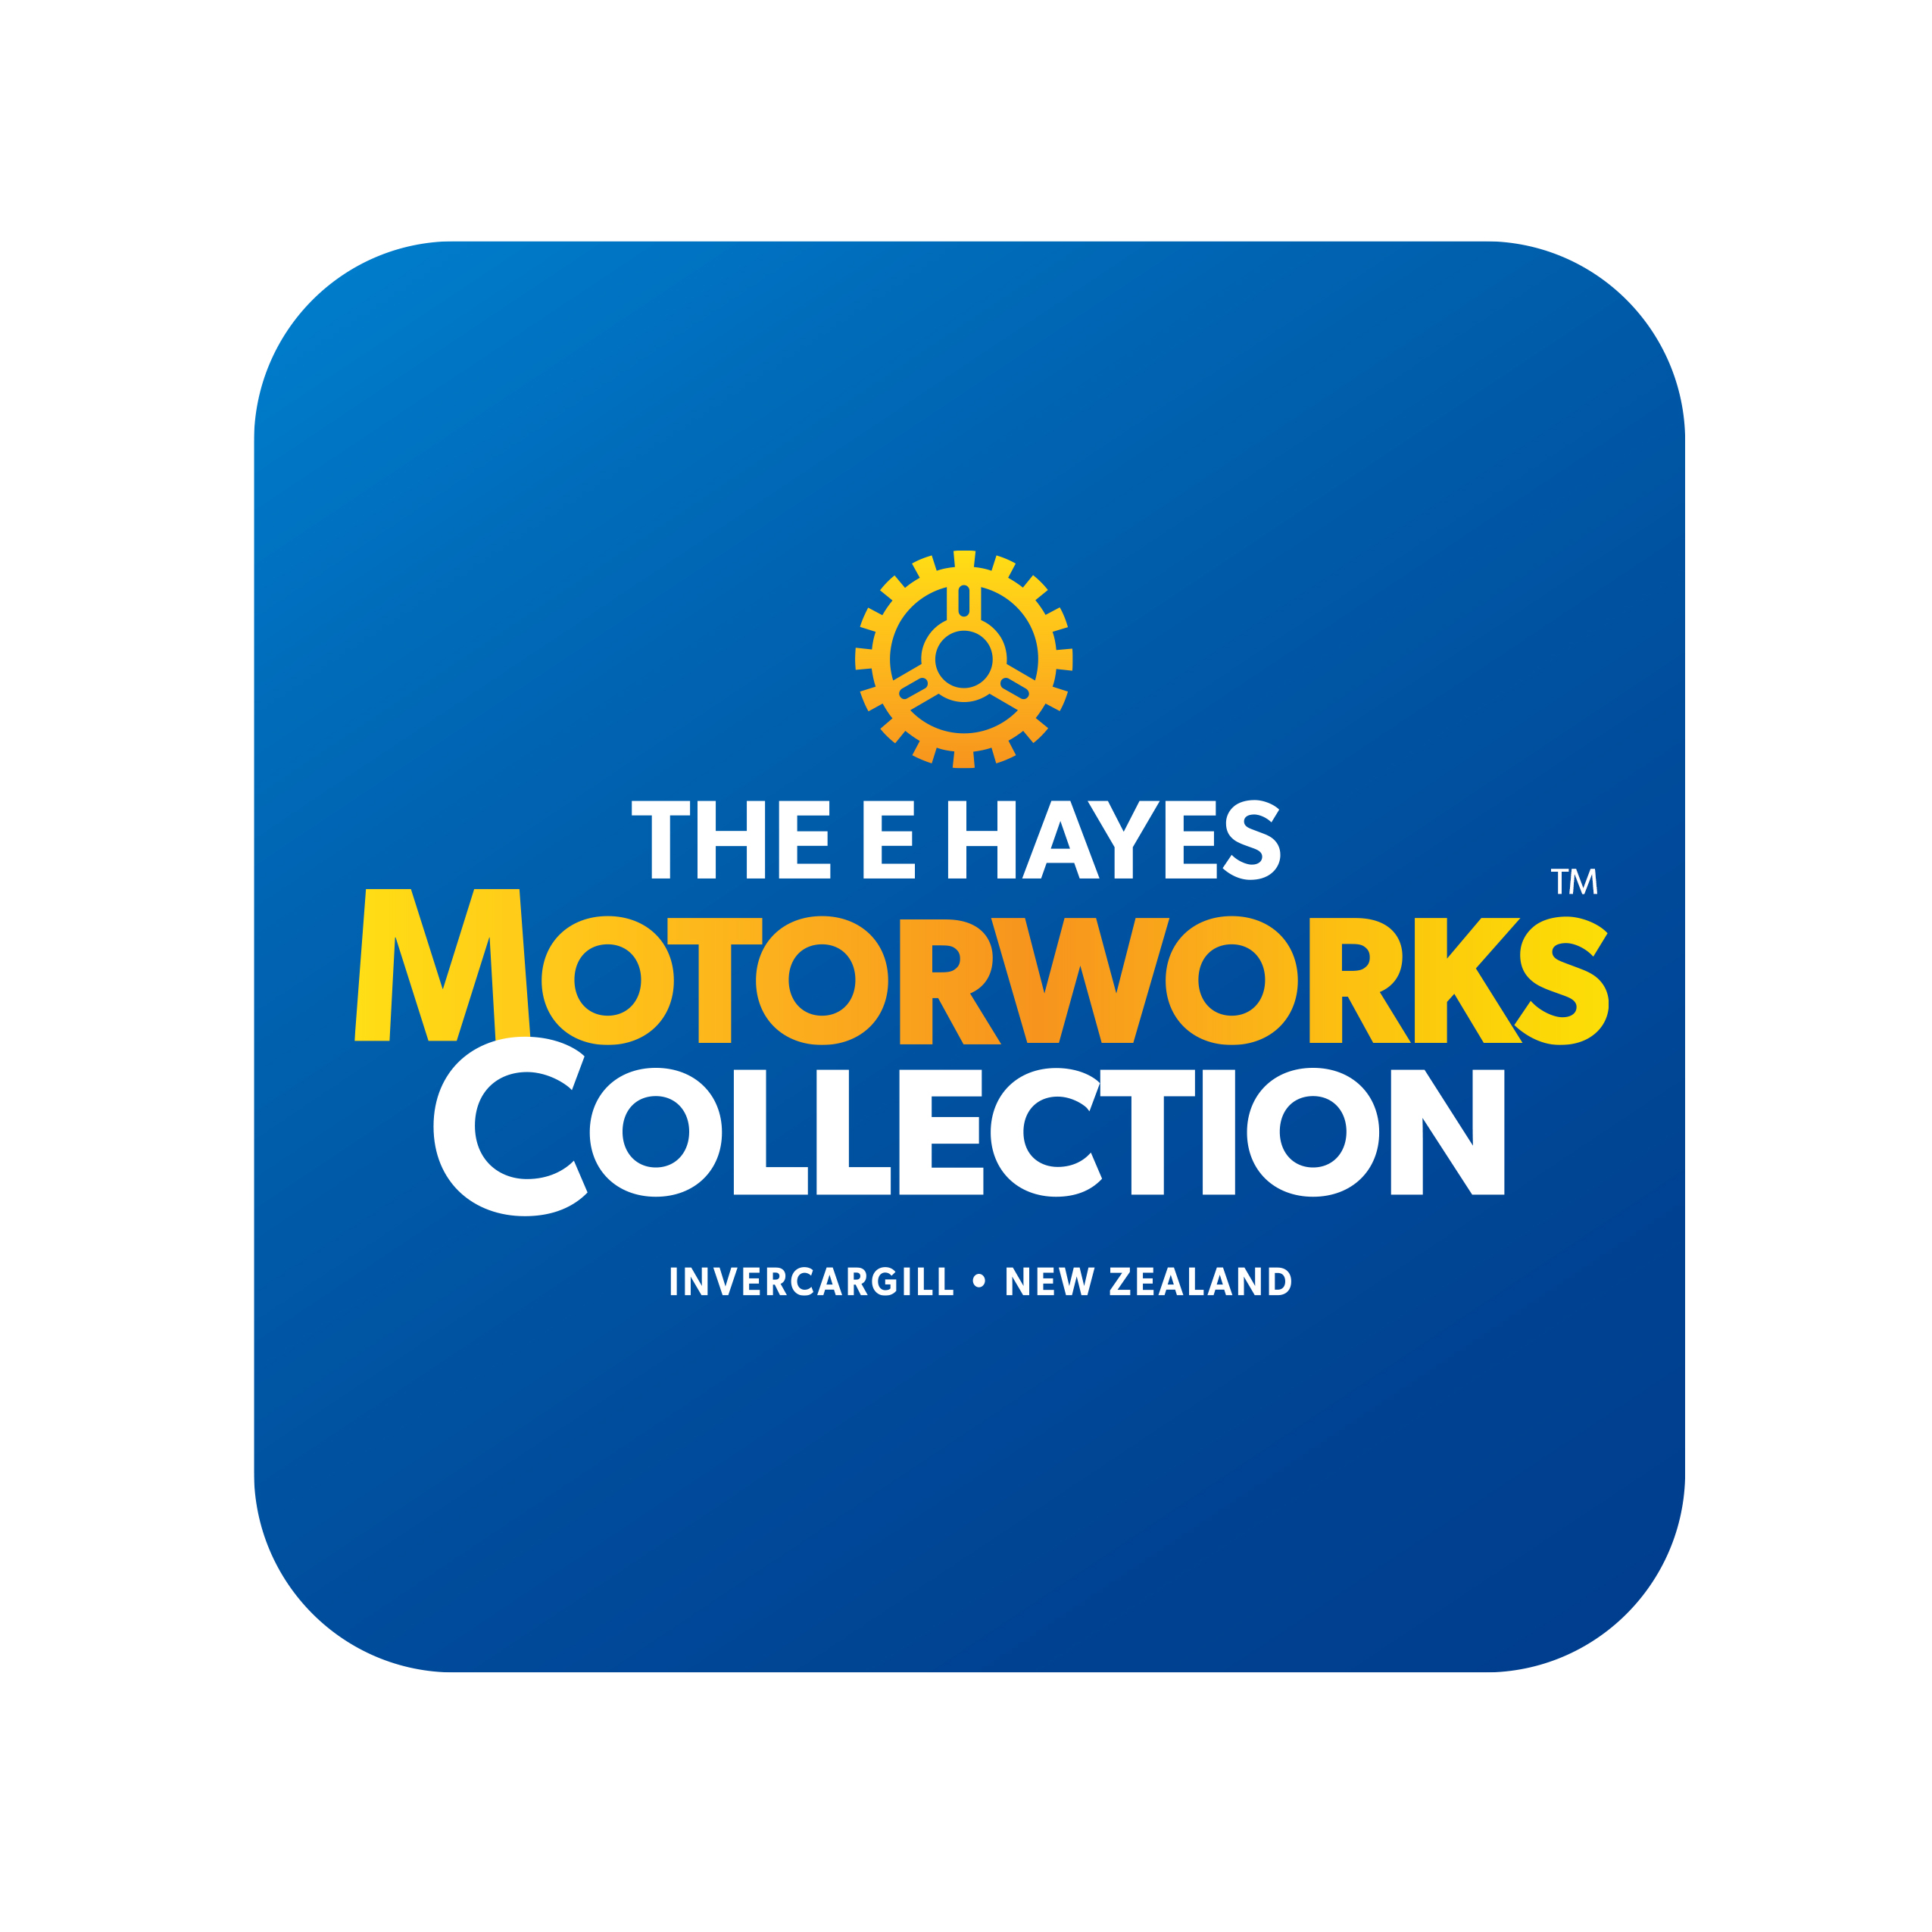 Motorworks Collection logo design by logo designer Yellow Pencil Brand Sharpening for your inspiration and for the worlds largest logo competition